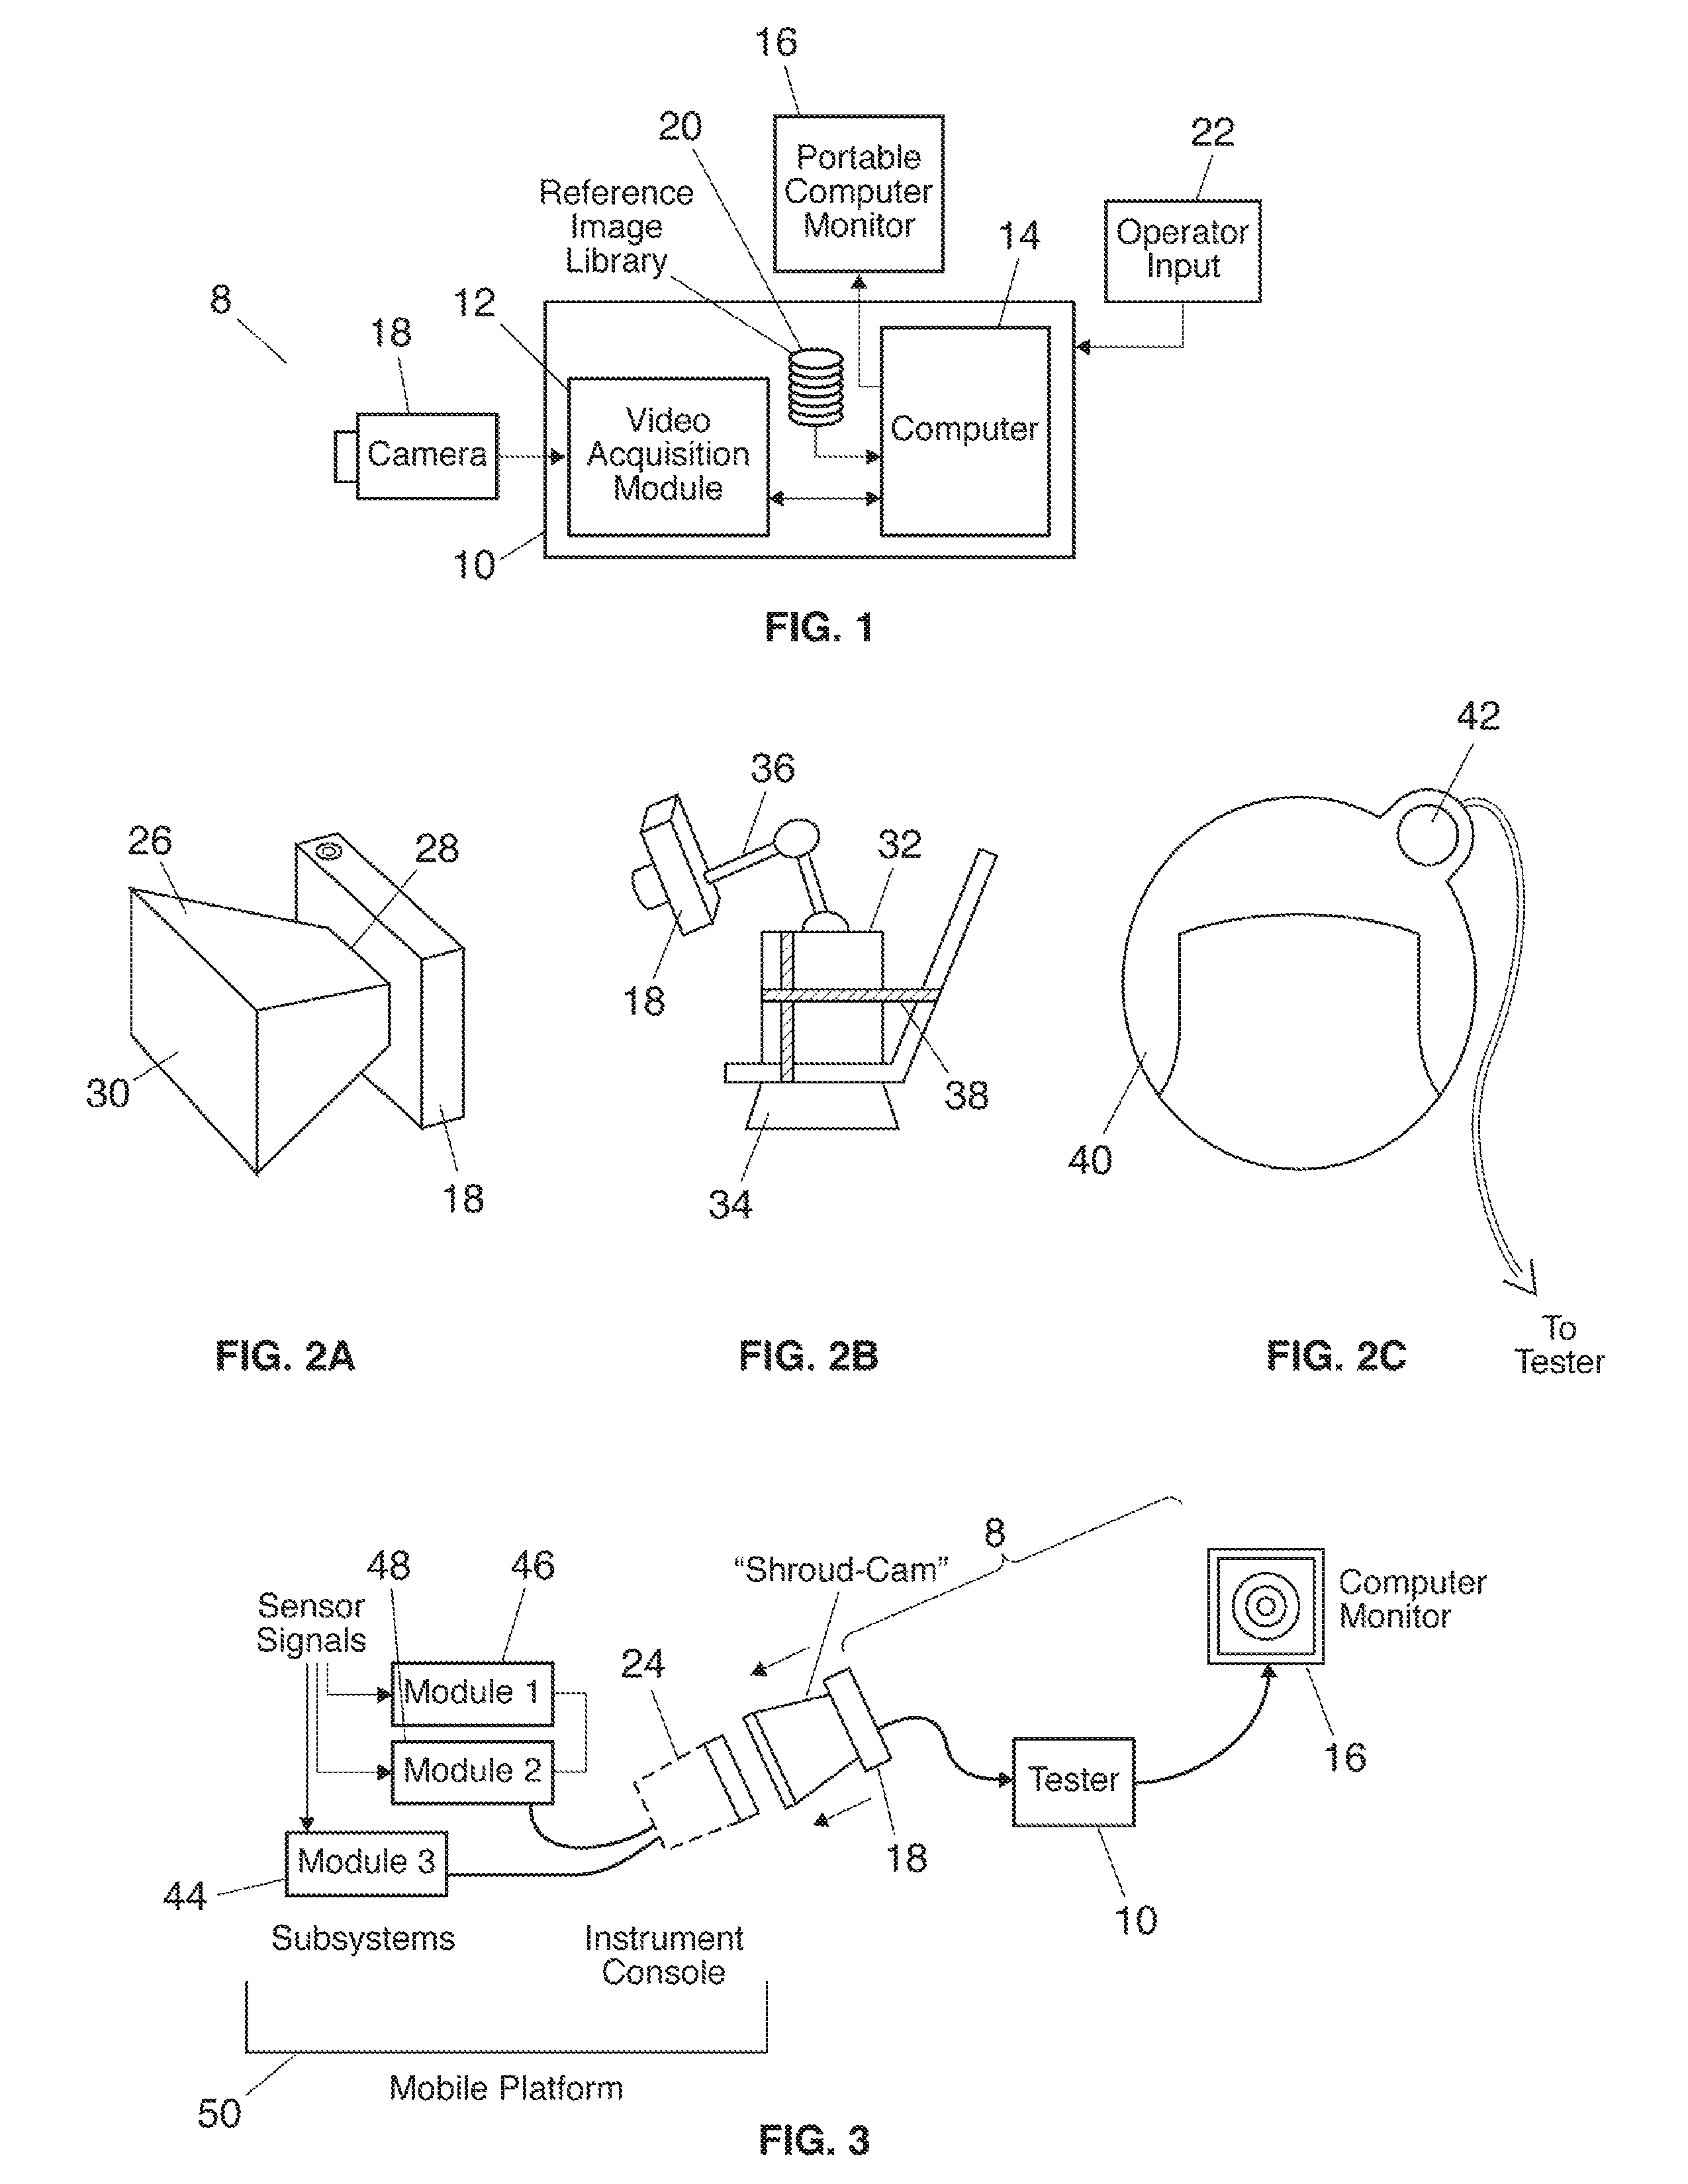 Method and system for validating video apparatus in an active environment